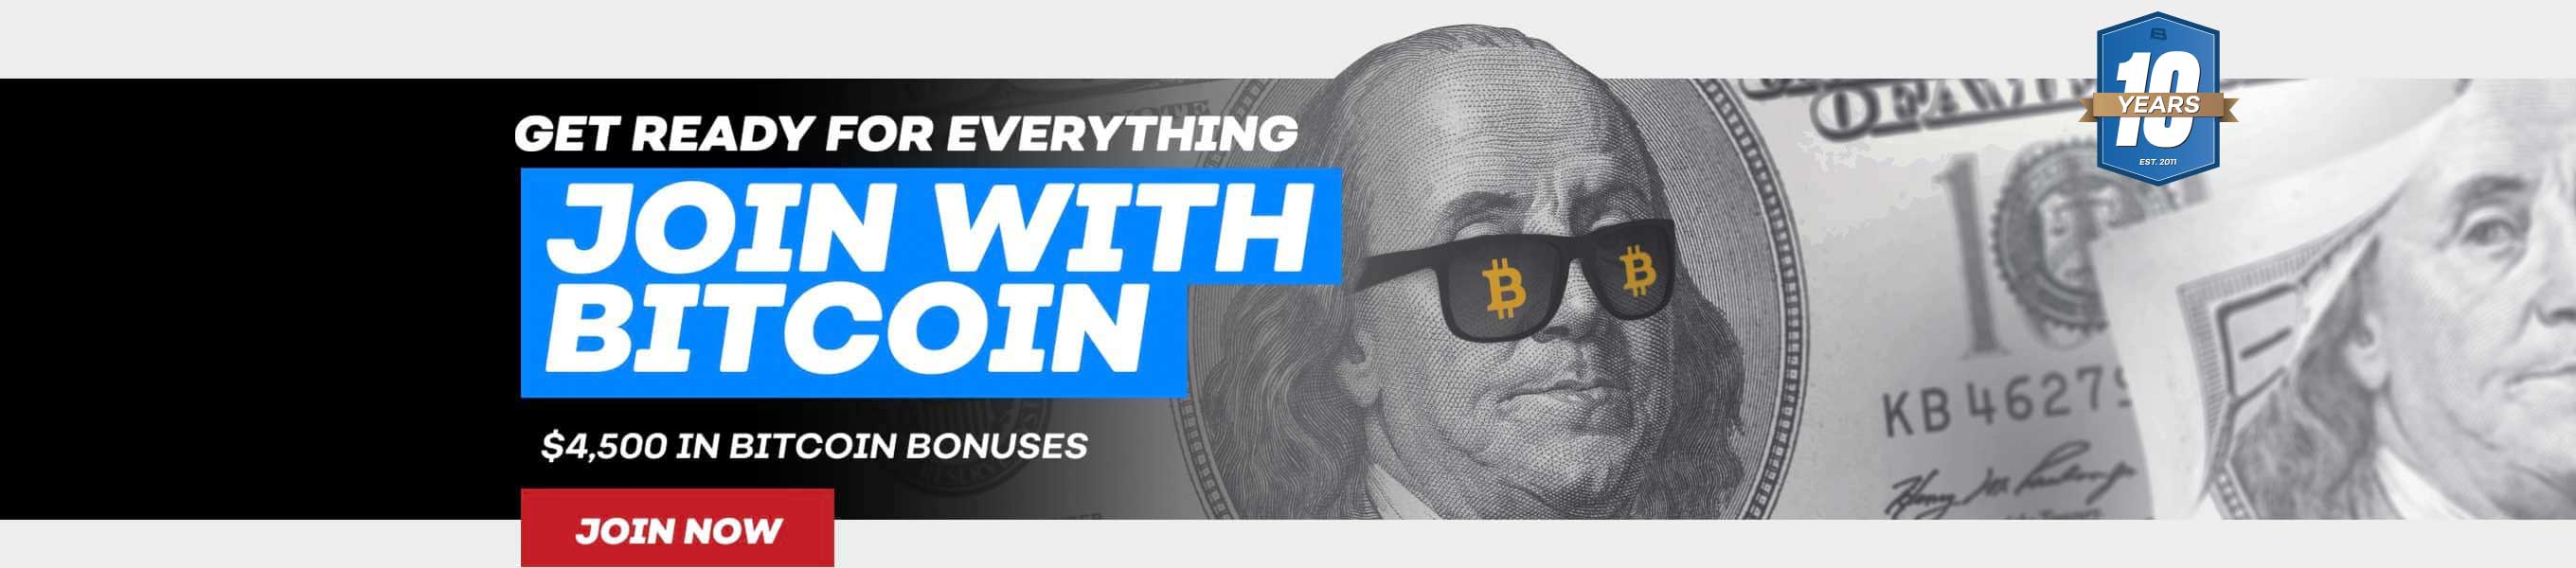 Get up to $4500 in bitcoin bonus when you join Bovada